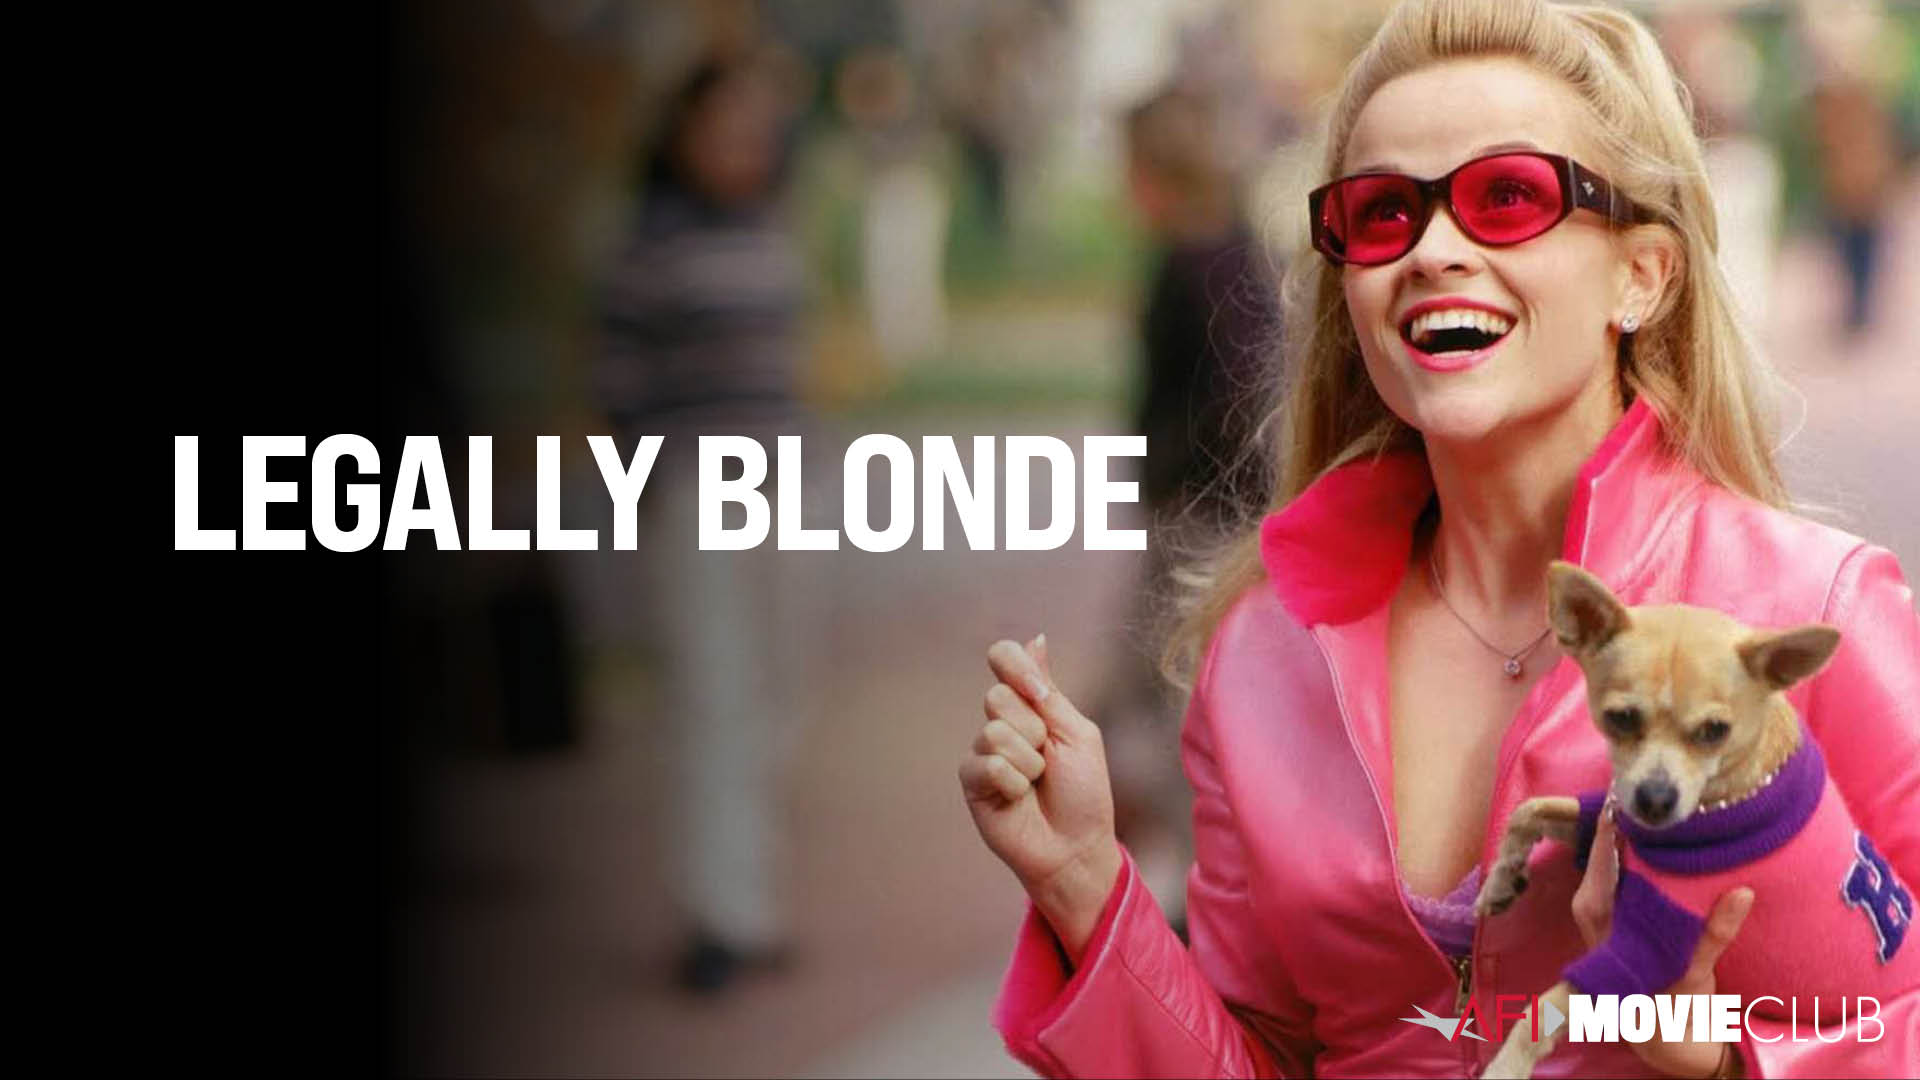 Legally Blonde Film Still - Reese Witherspoon